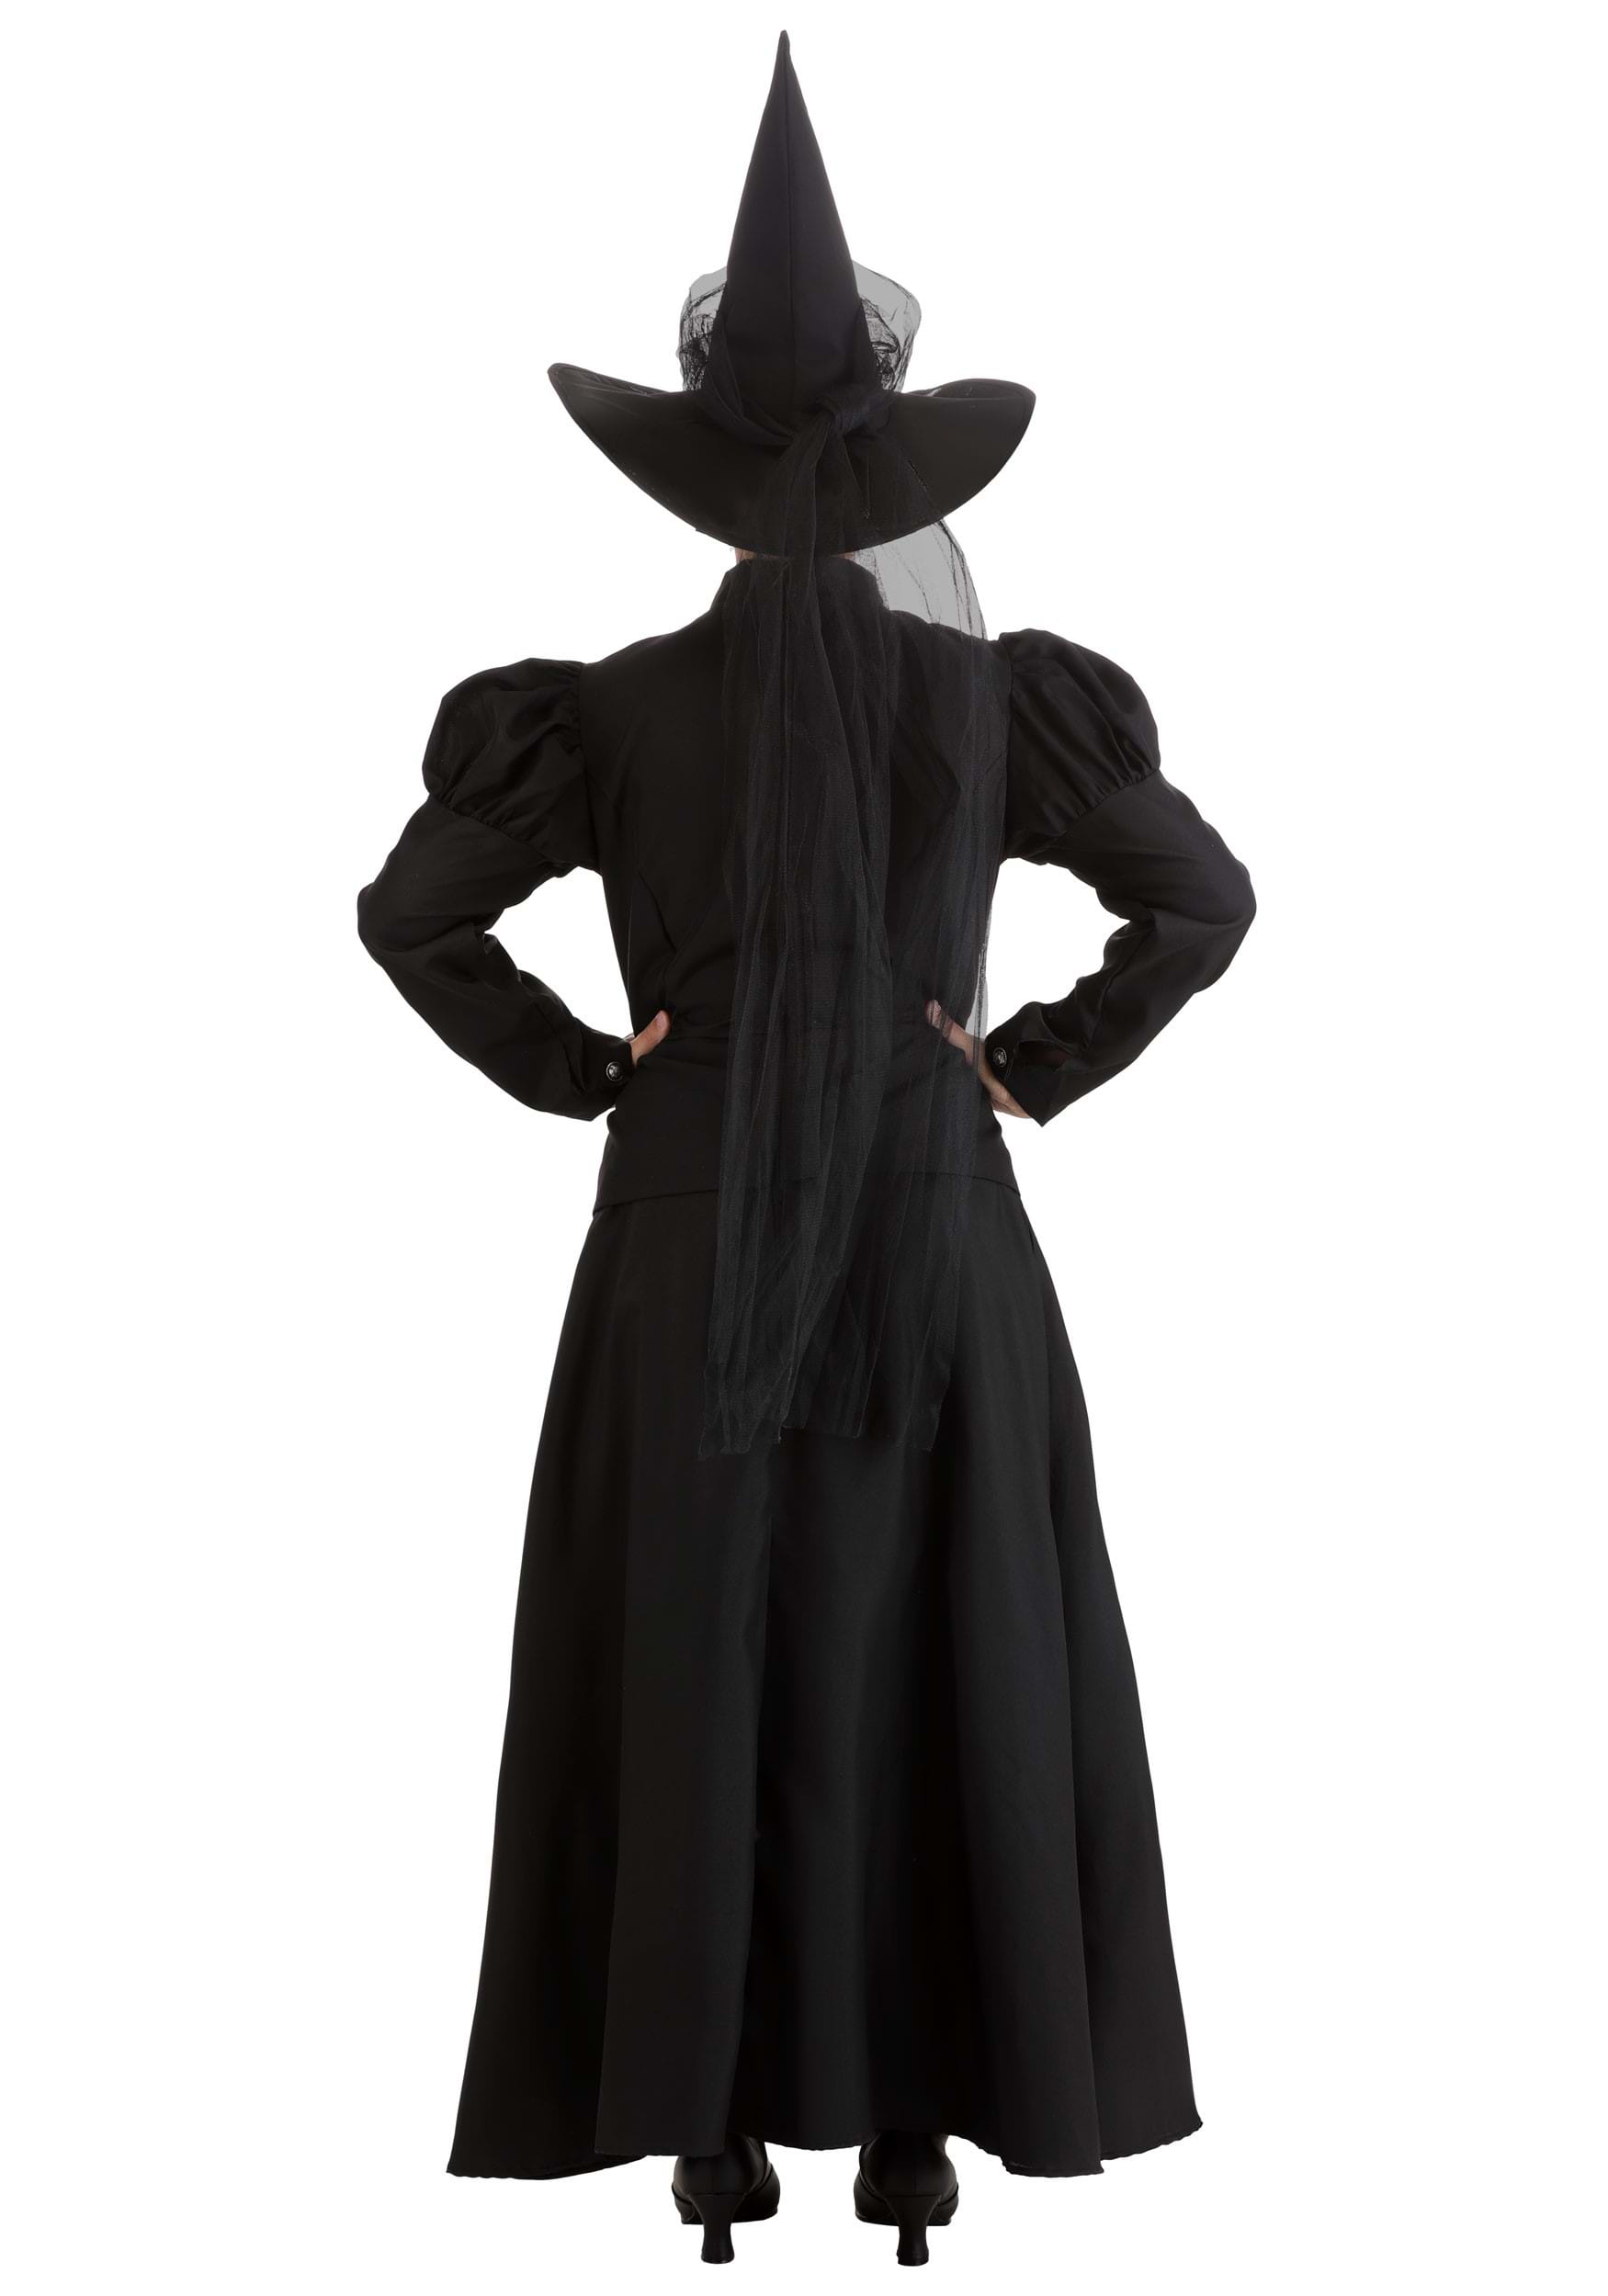 Deluxe Wicked Witch Costume